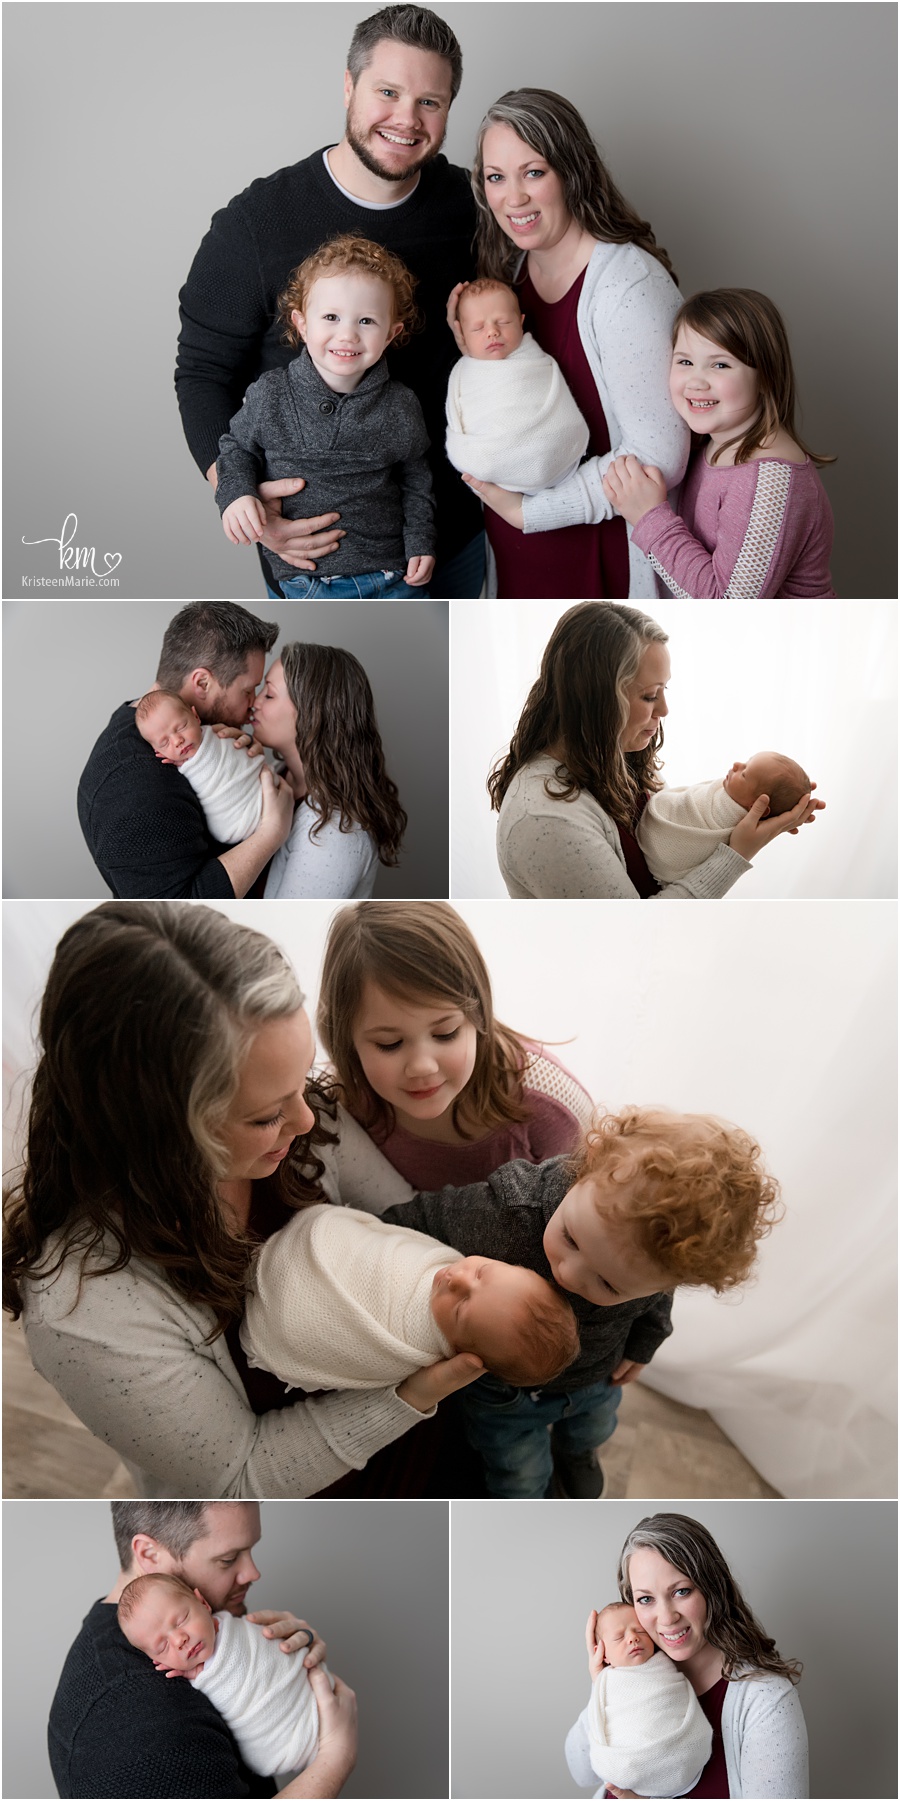 family poses with newborn baby - family of 5